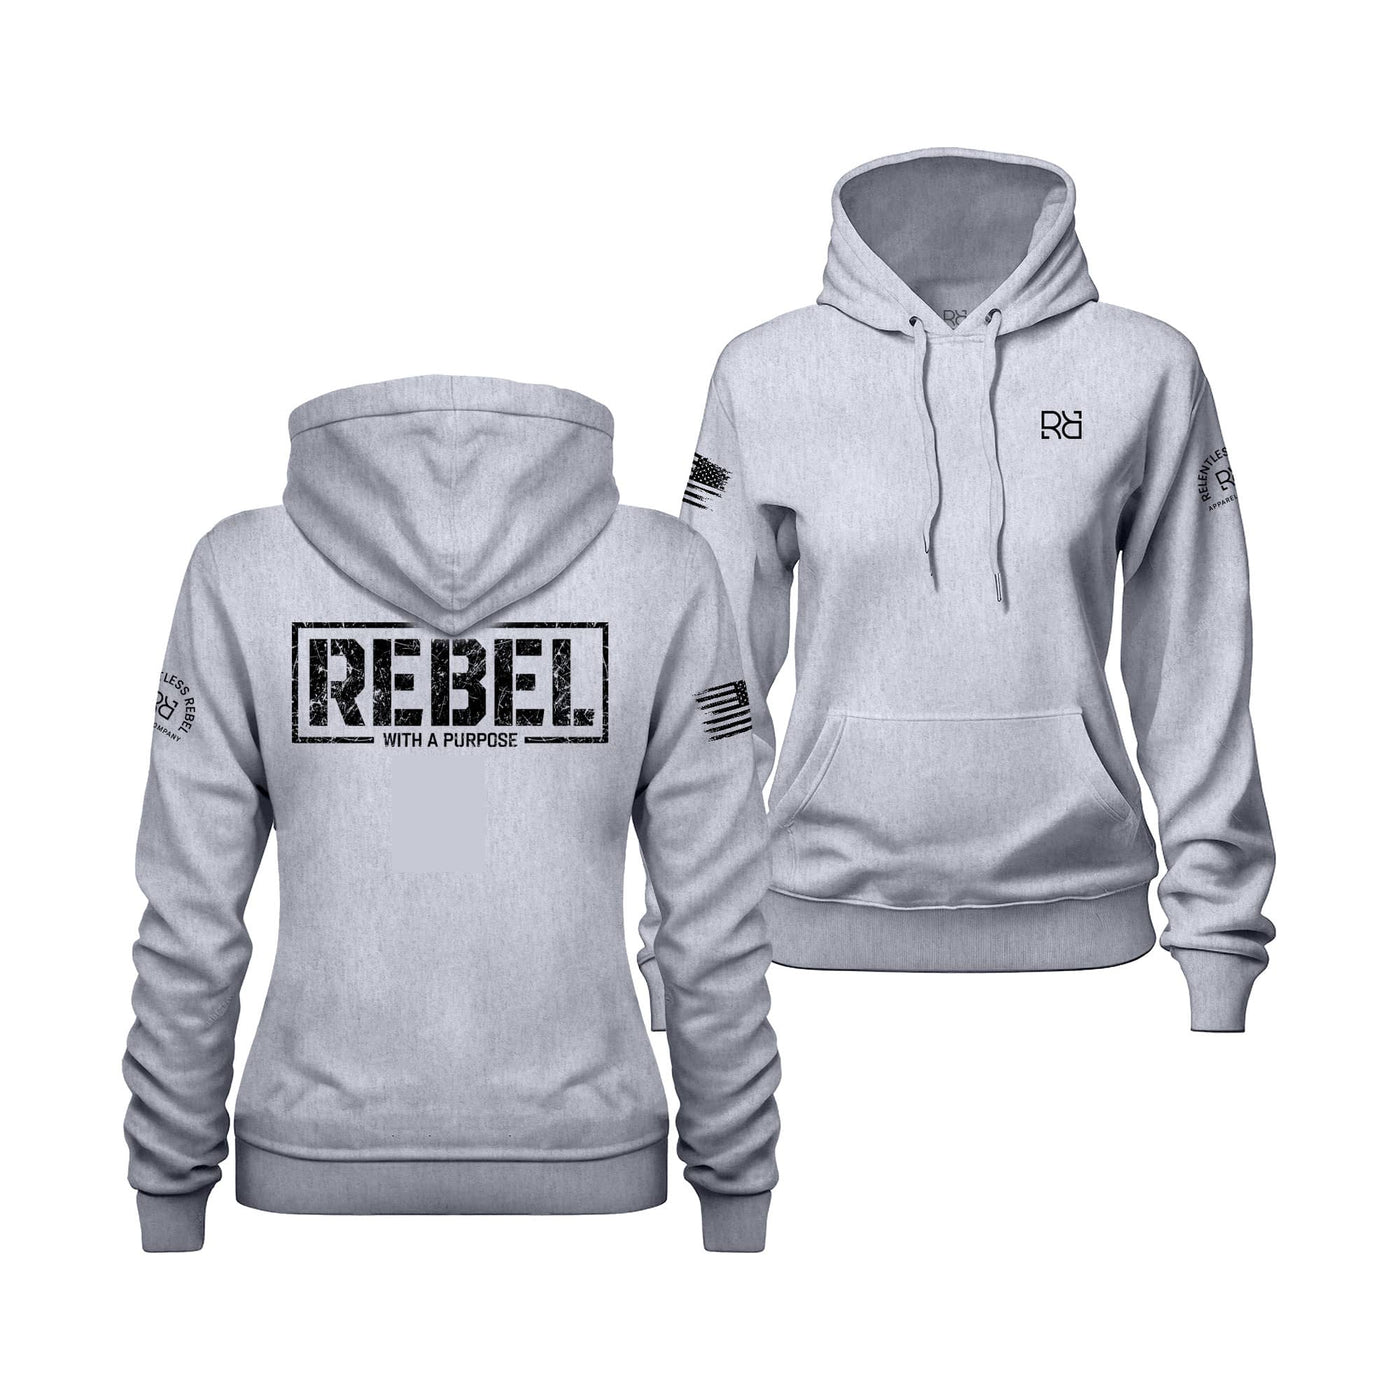 Rebel With a Purpose | Women's Hoodie